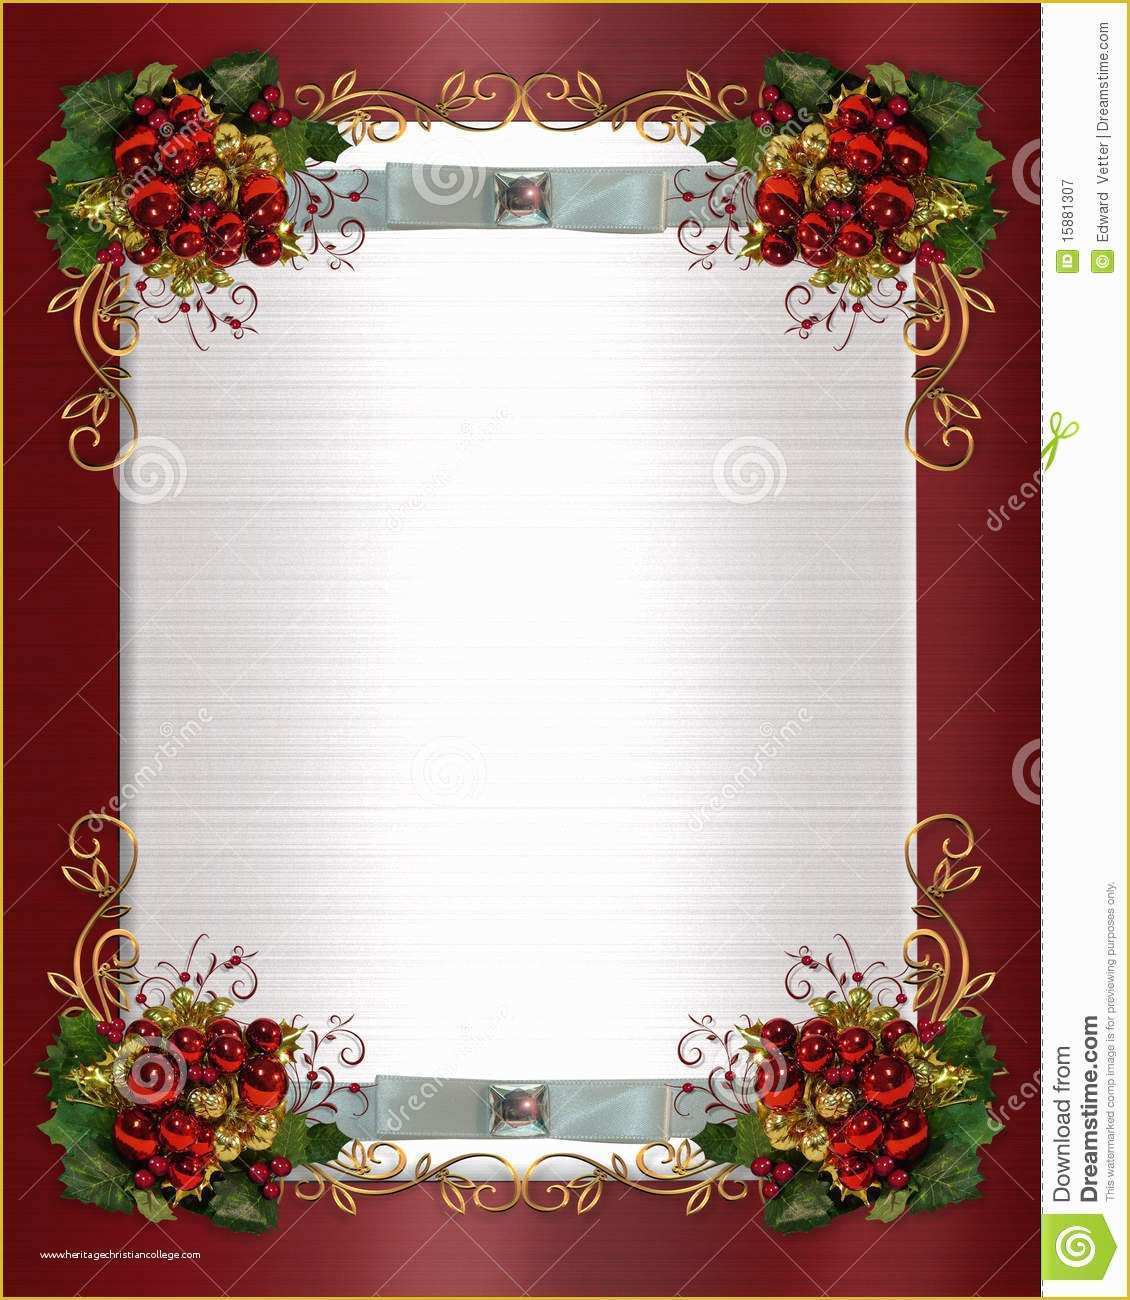 Holiday Party Templates Free Of Christmas Party Invitation Templates Free Download